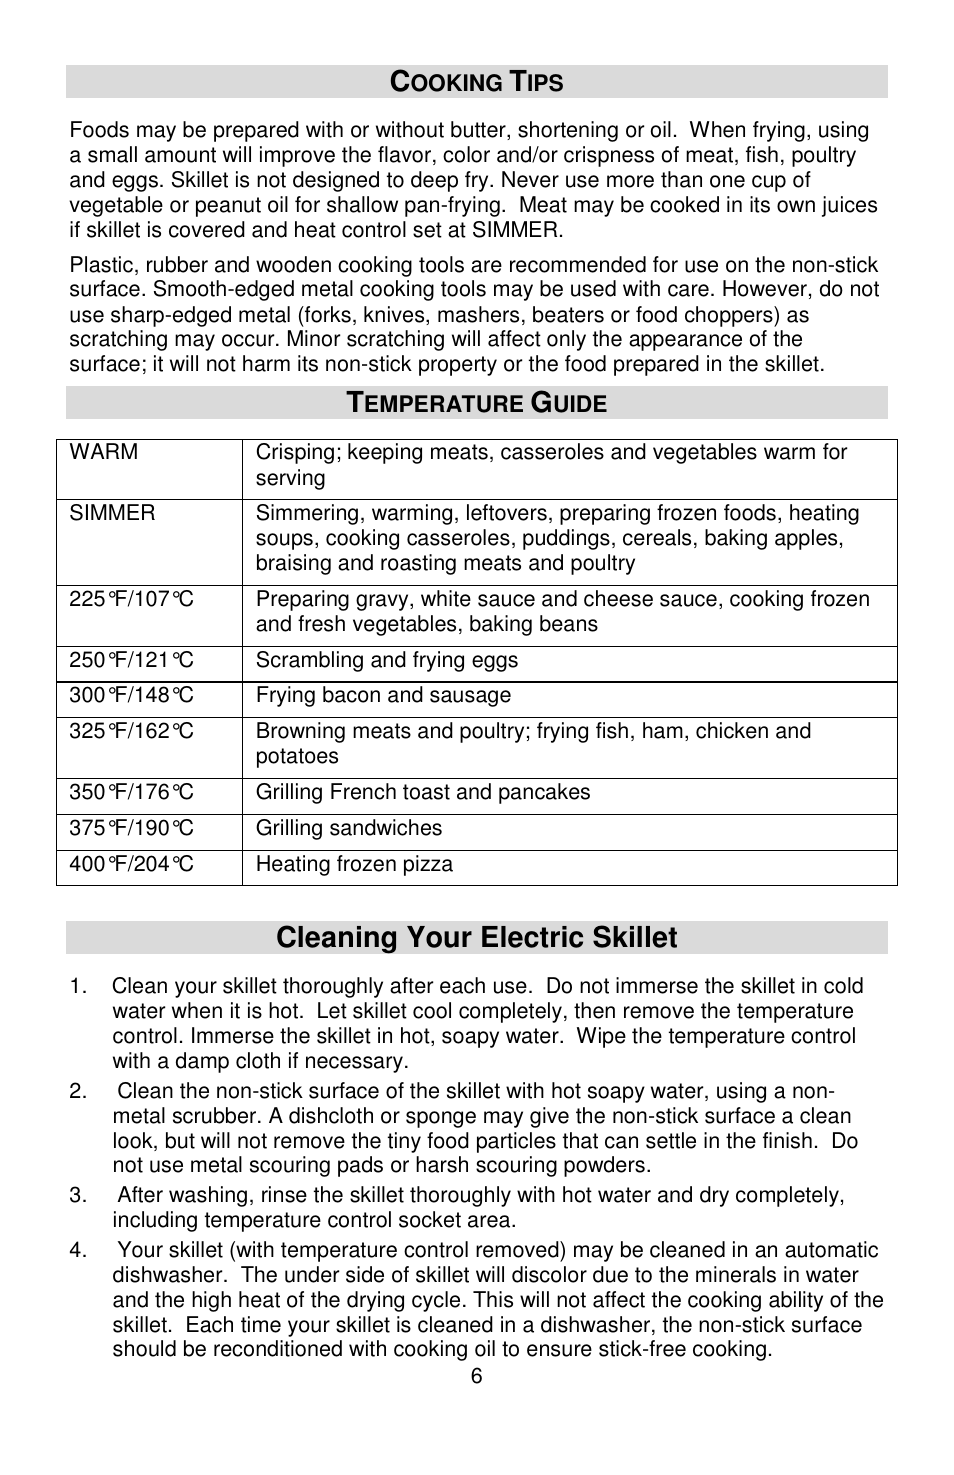 Cleaning your electric skillet | West Bend L5571D User Manual | Page 6 / 44